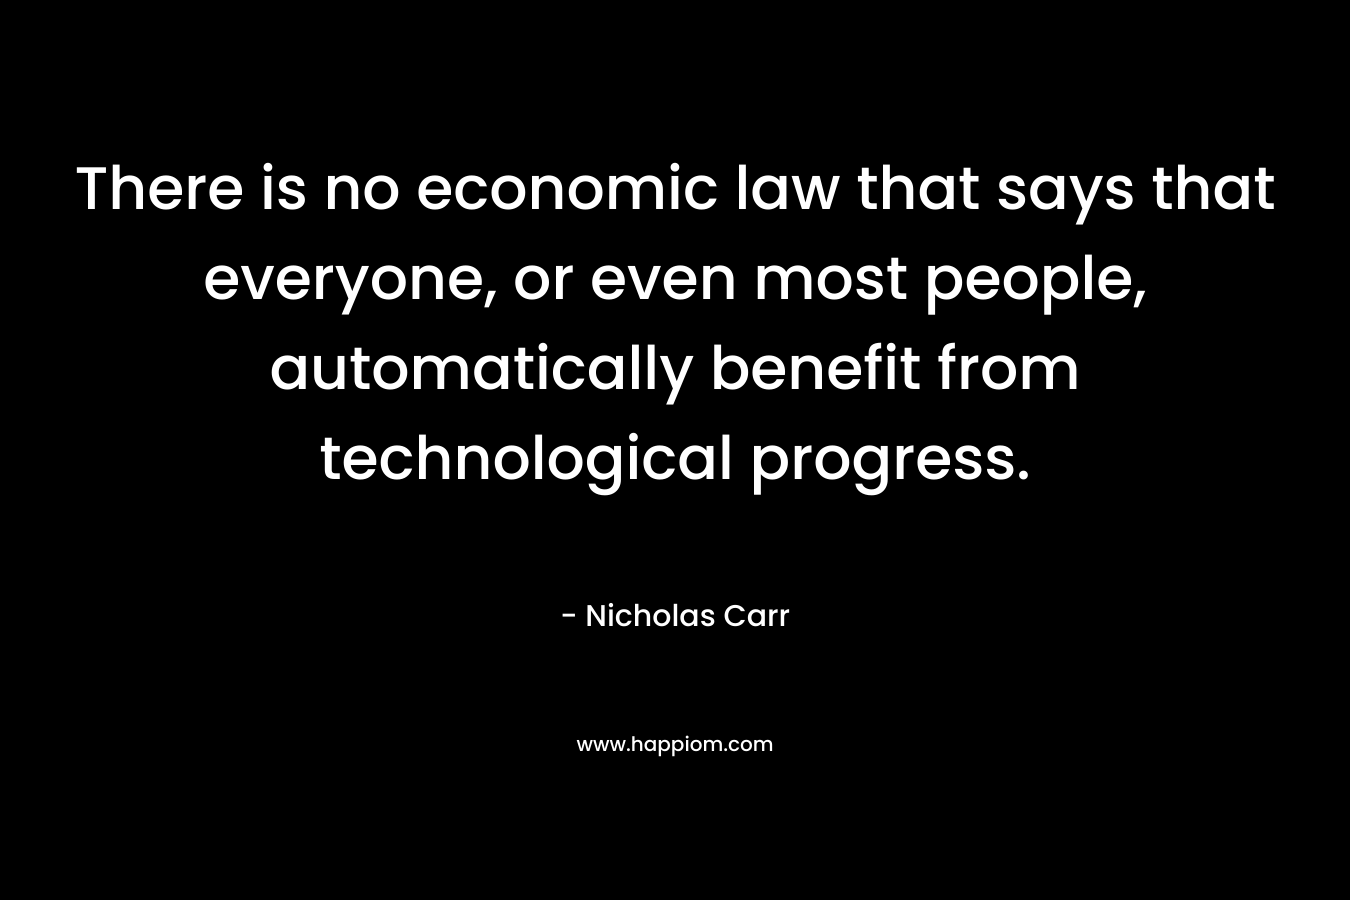 There is no economic law that says that everyone, or even most people, automatically benefit from technological progress. – Nicholas Carr